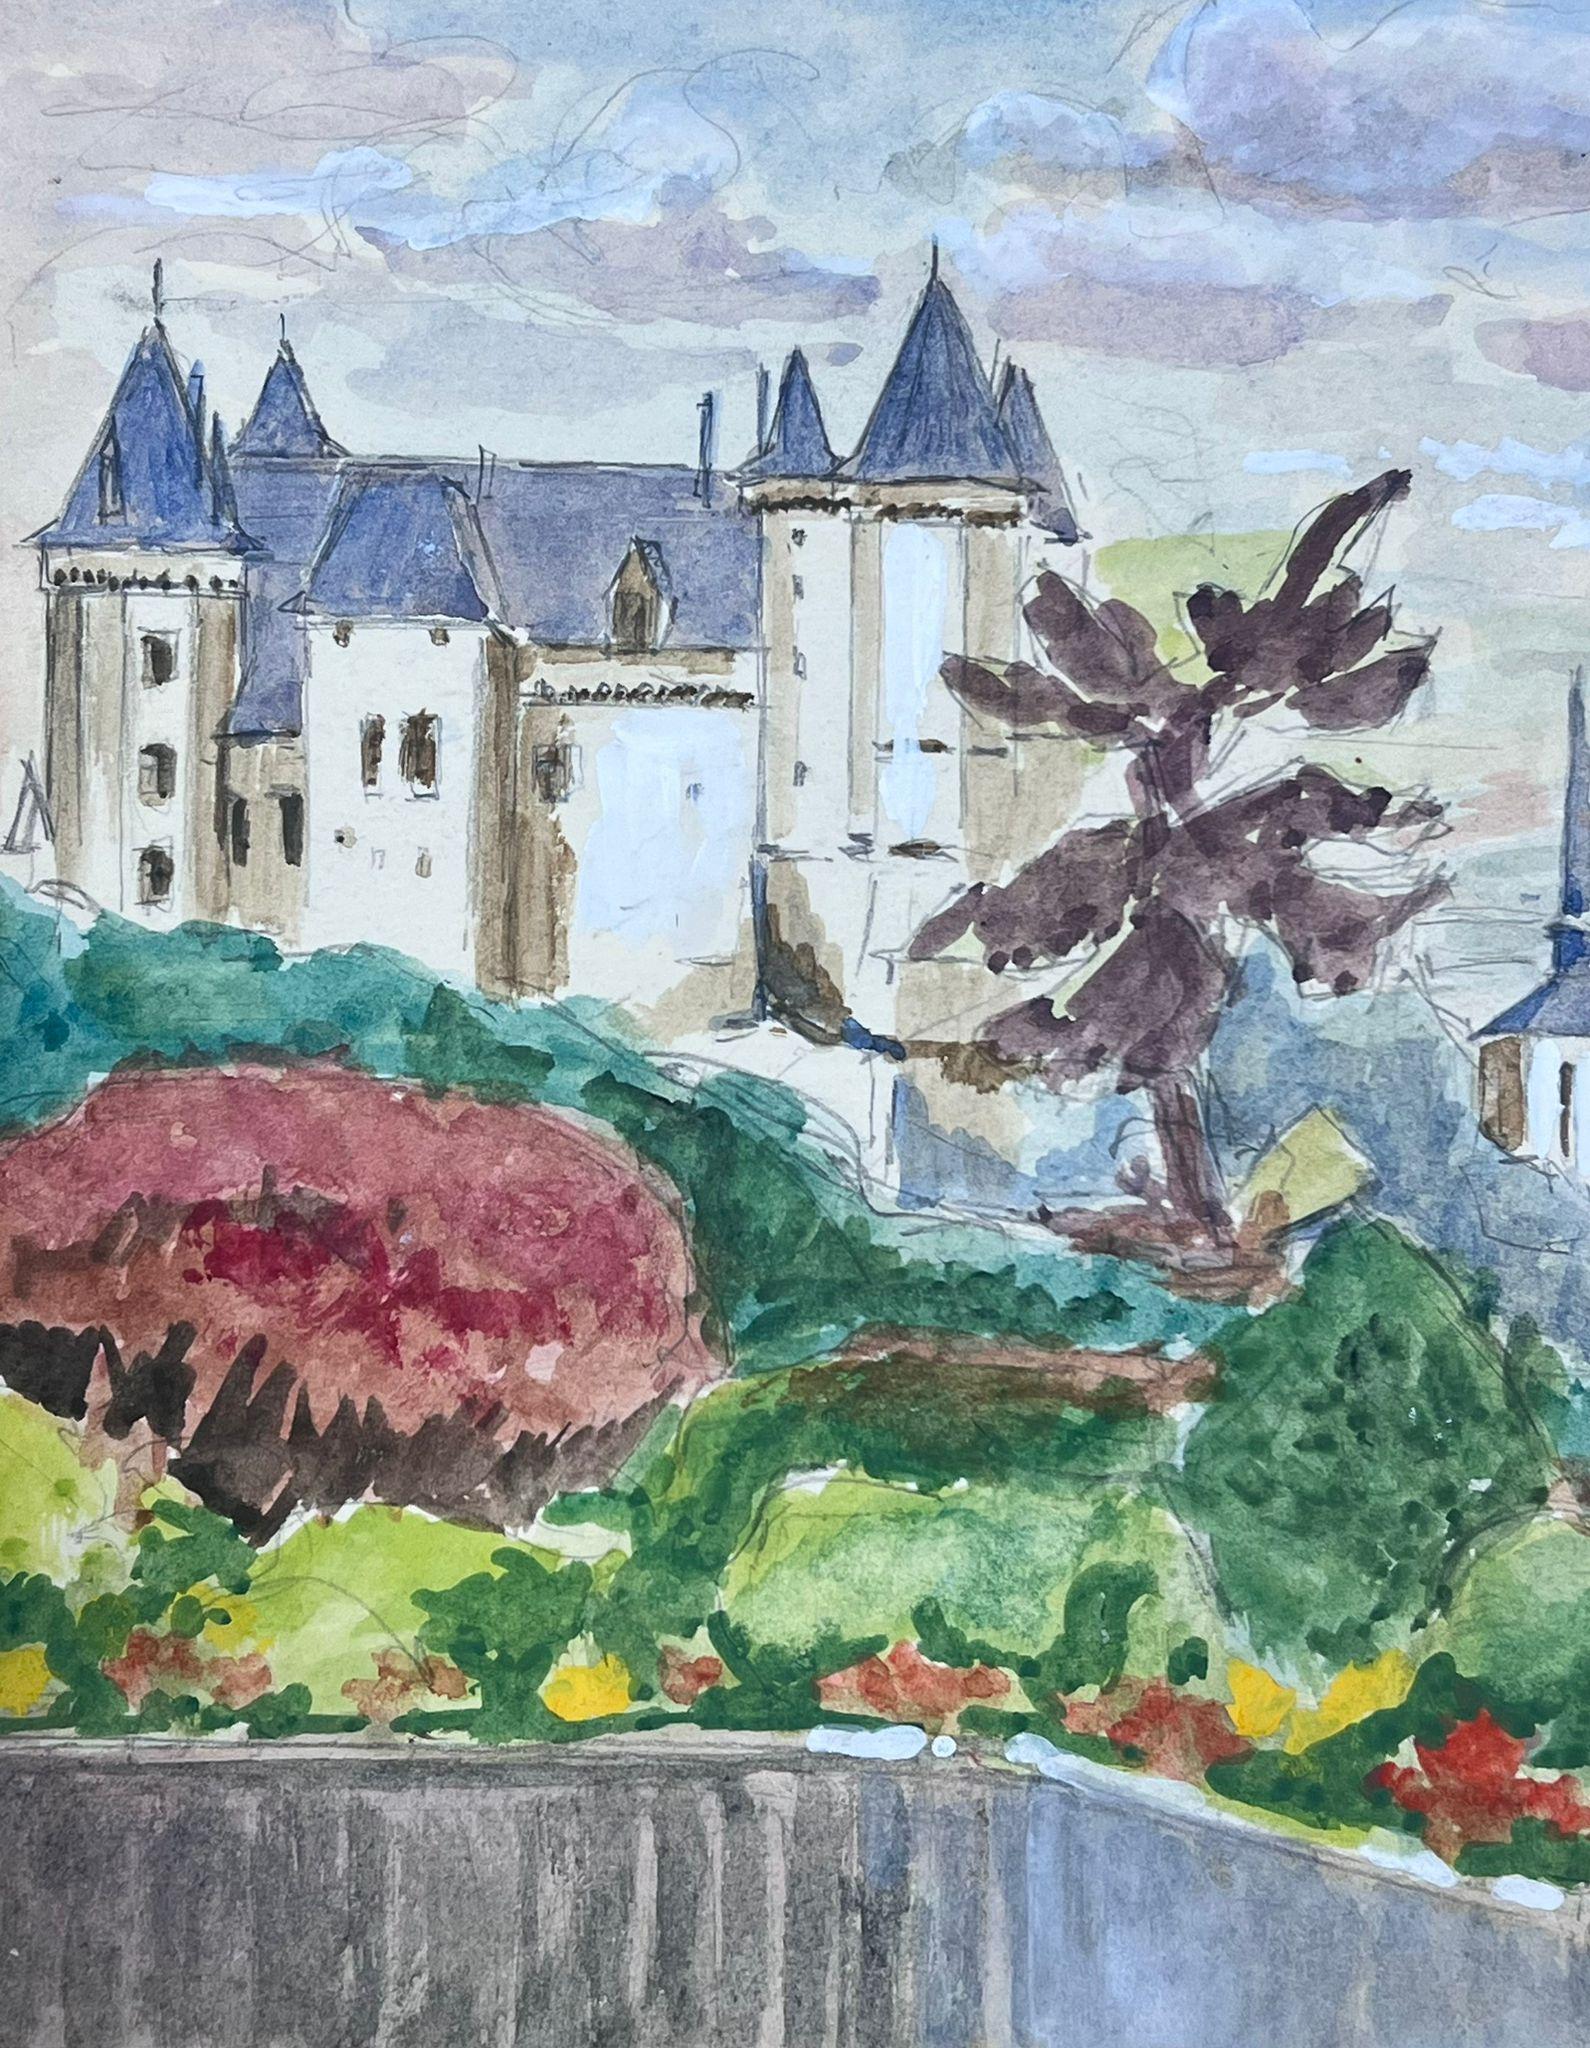 French Landscape
by Guy Nicod
(French 1923 - 2021)
watercolour on artist paper, unframed
painting : 8 x 10 inches
provenance: artists estate, France
condition: very good and sound condition